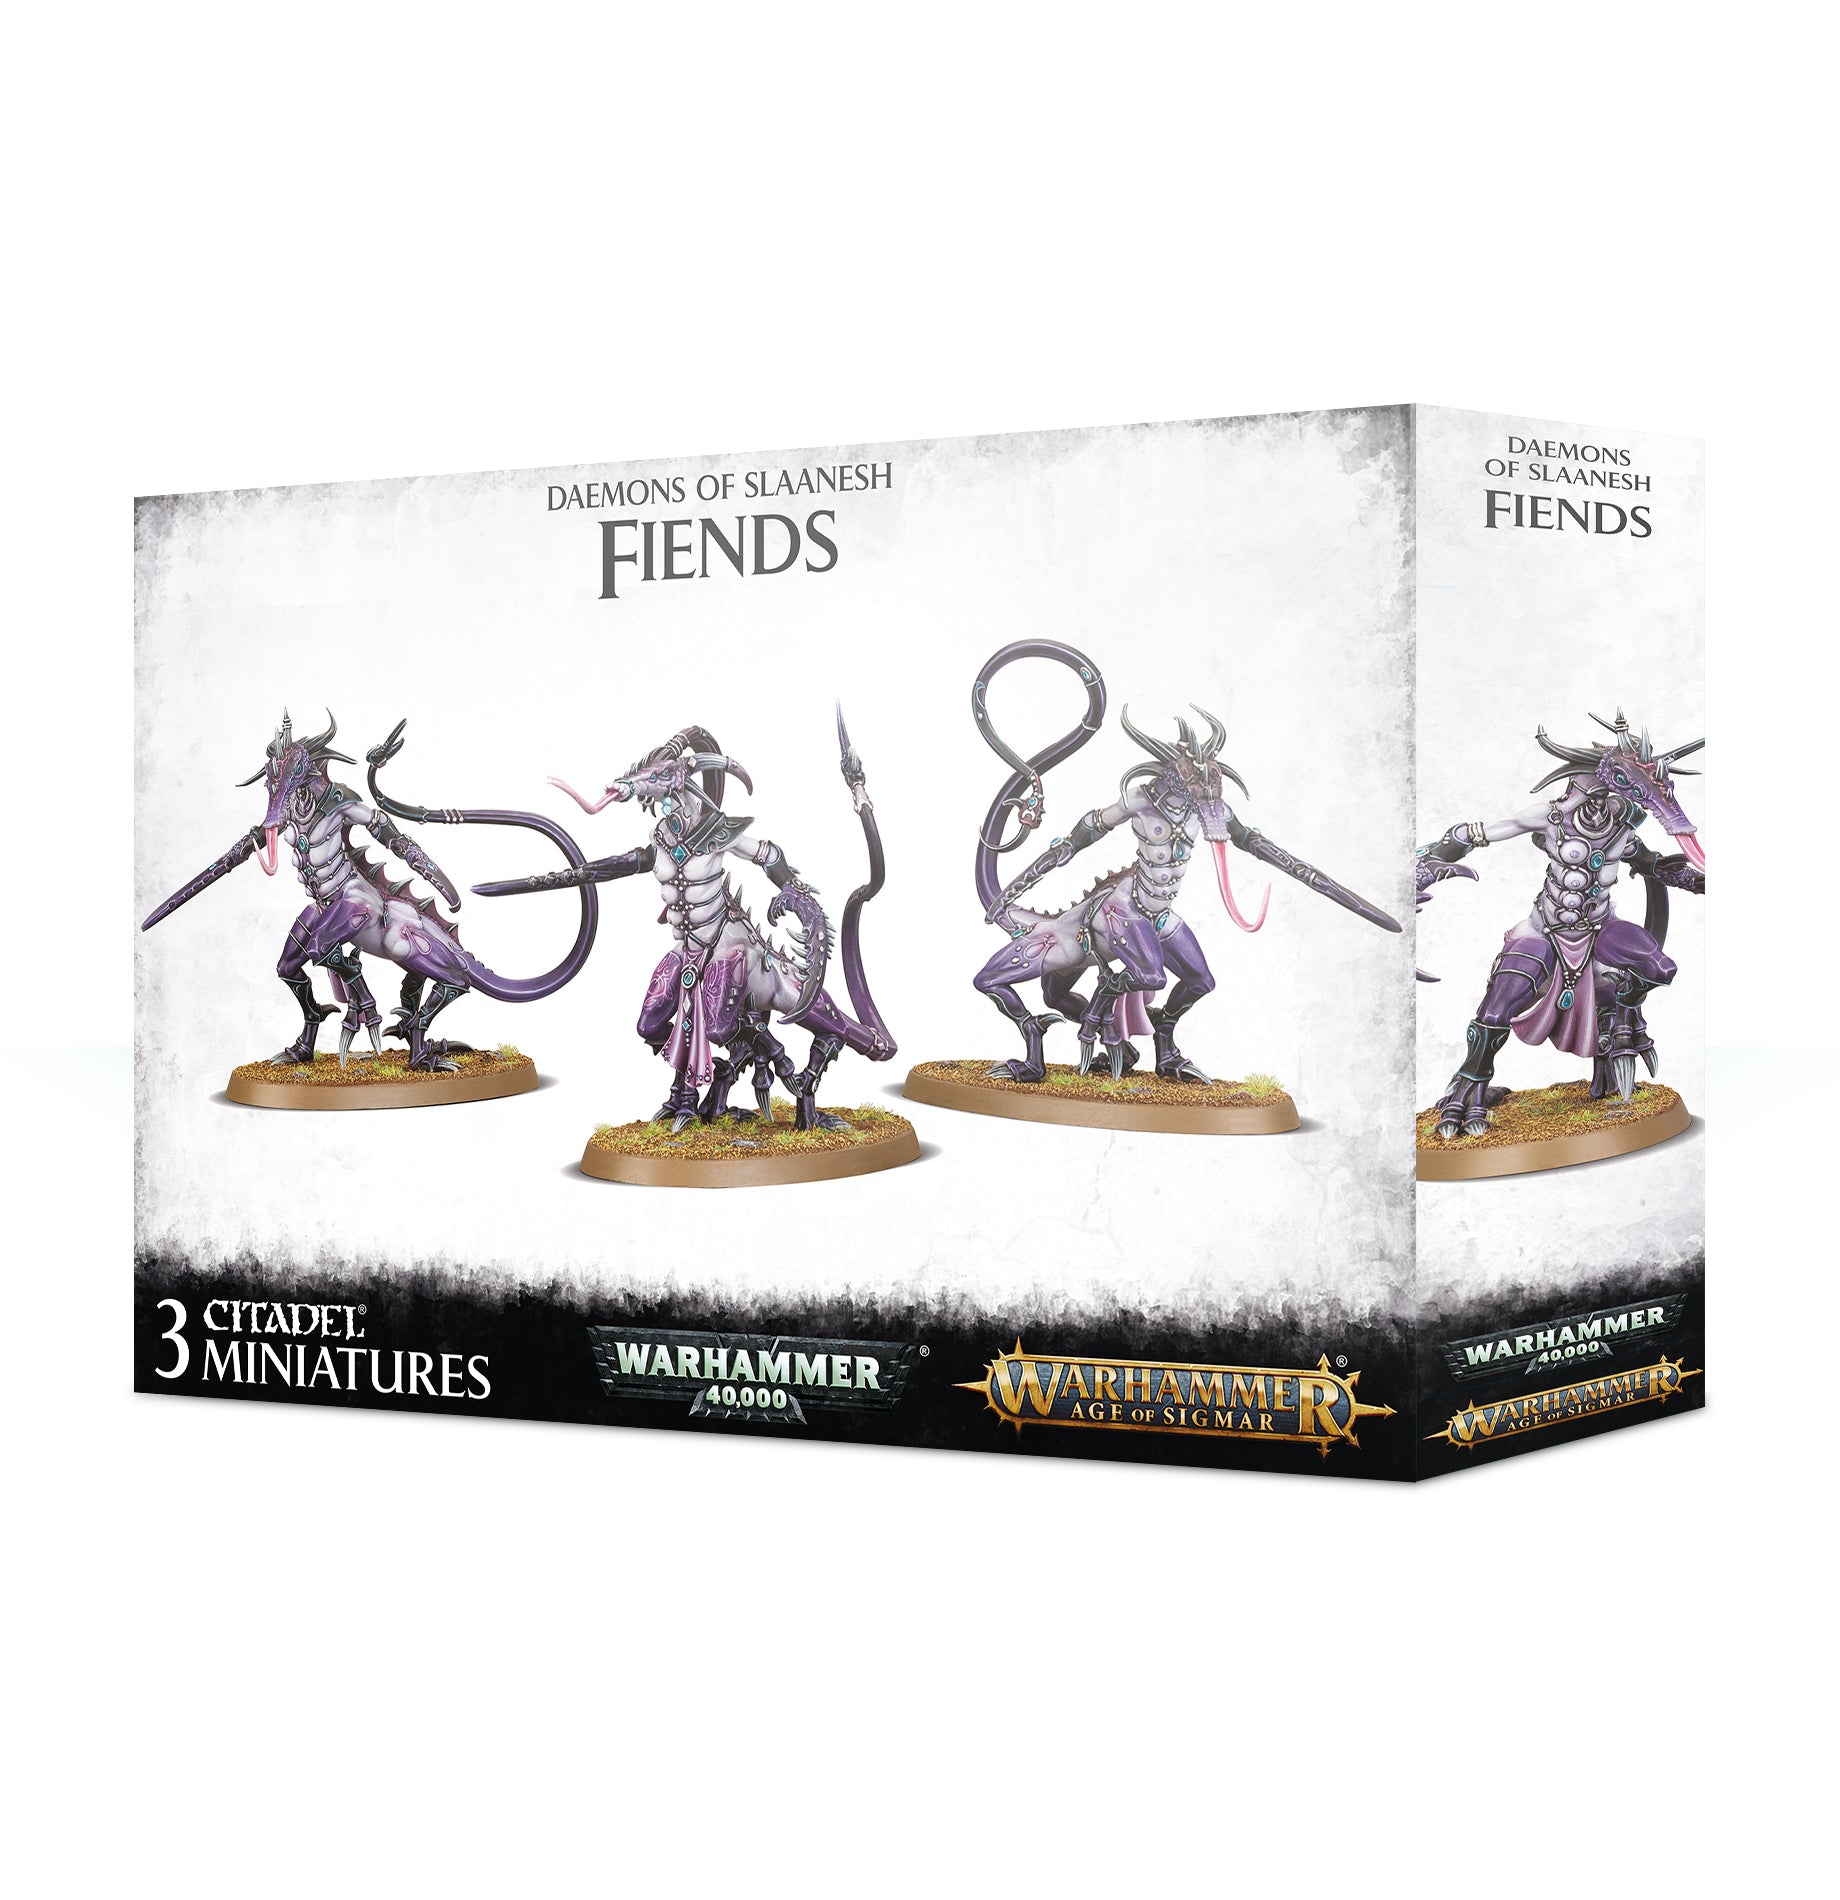 DAEMONS OF SLAANESH: FIENDS (DIRECT) Chaos Daemons Games Workshop    | Red Claw Gaming